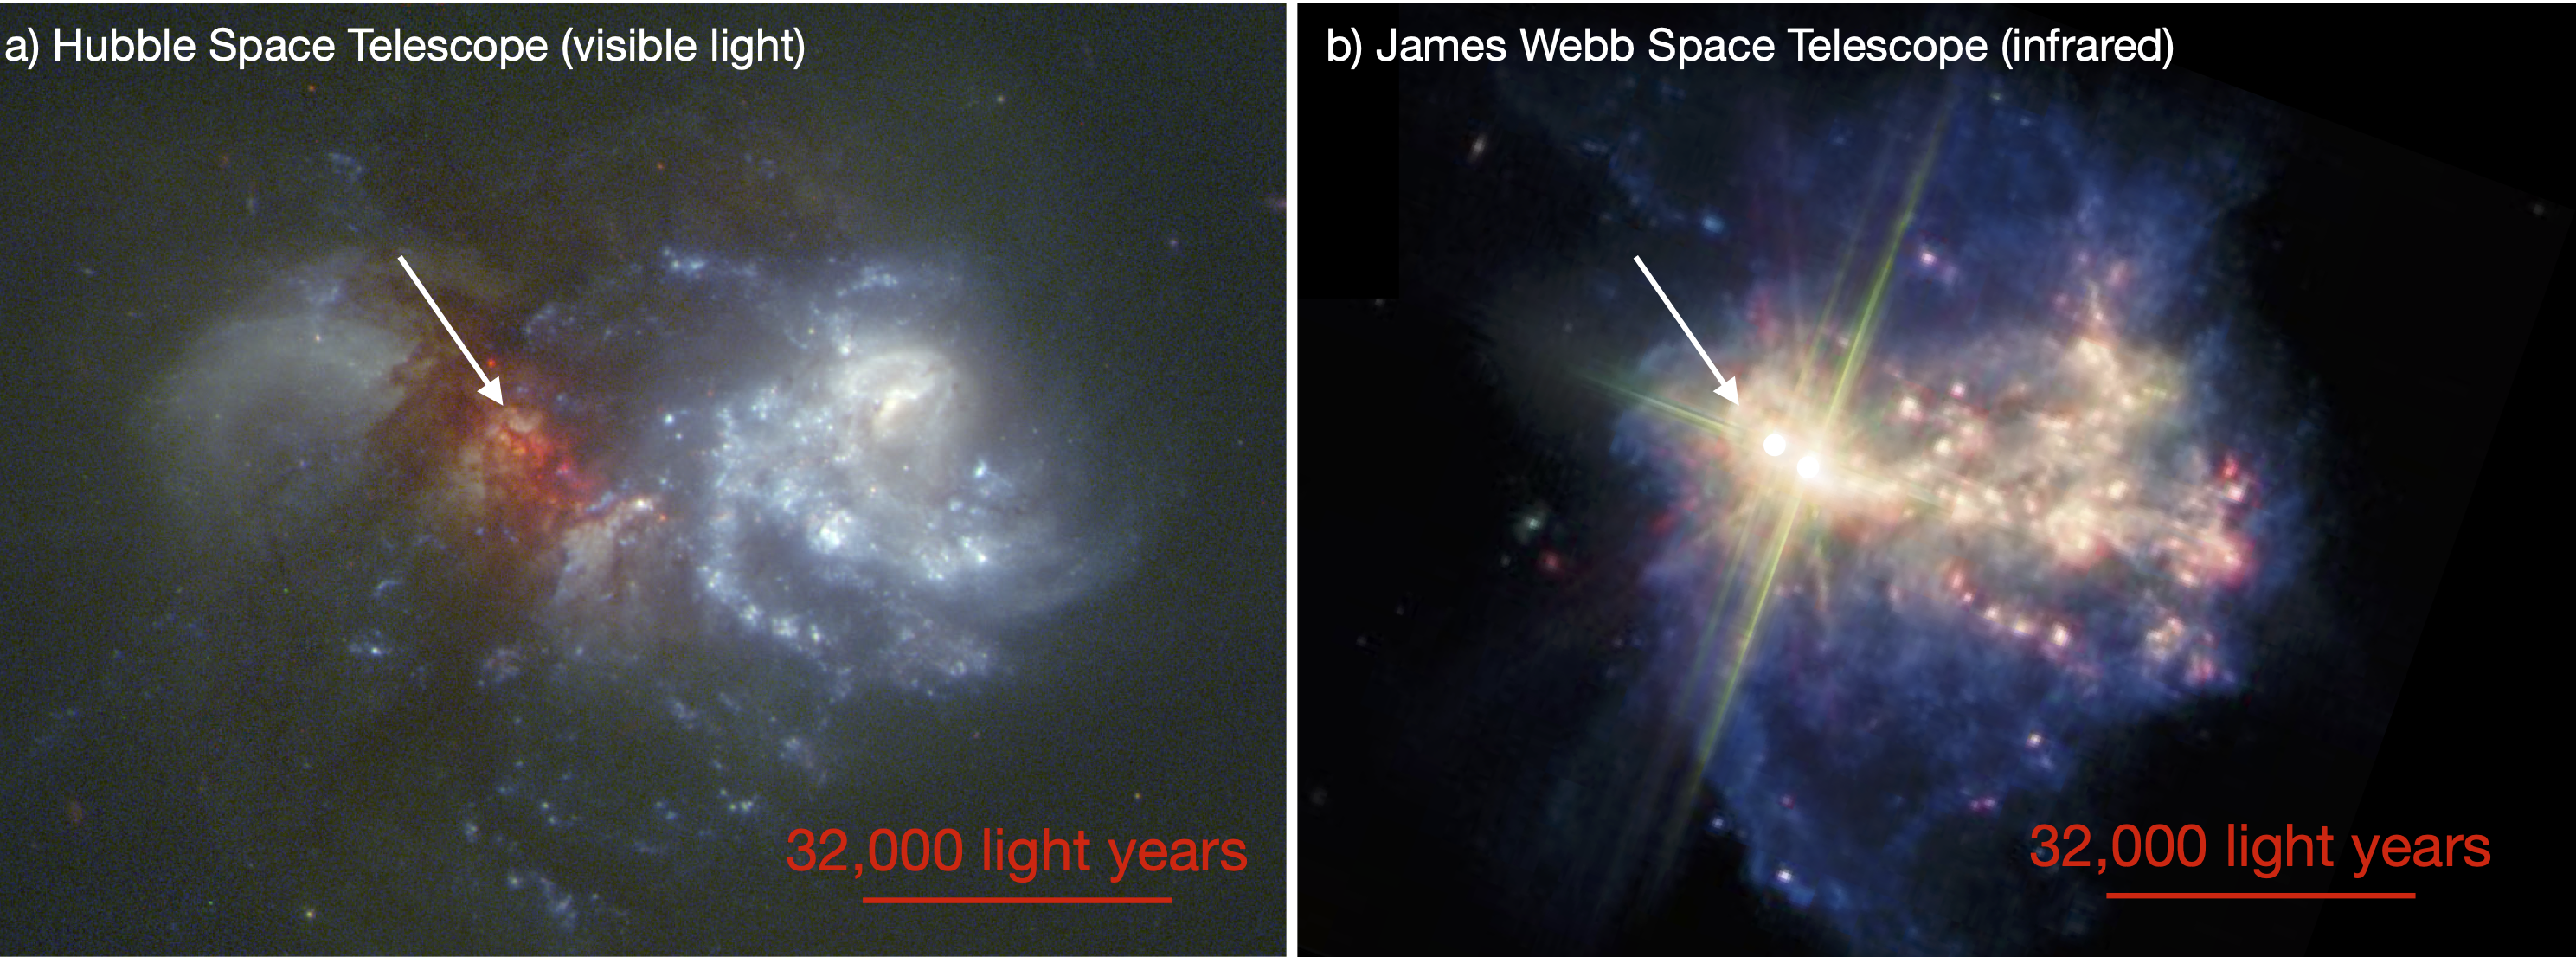 Visible light (Hubble) and infrared light (Webb) images of the galaxy merger VV 114. The arrows point to the location of two bright regions - an energetic starburst and an active black hole - which are detected by Webb but are hidden behind dust lanes in the Hubble image (adapted from Evans et al. 2022 Astrophysical Journal Letters, Volume 940). Webb Telescope image Credit: ESA/Webb, NASA & CSA, L. Armus & A. Evans, Acknowledgement: R. Colombari)